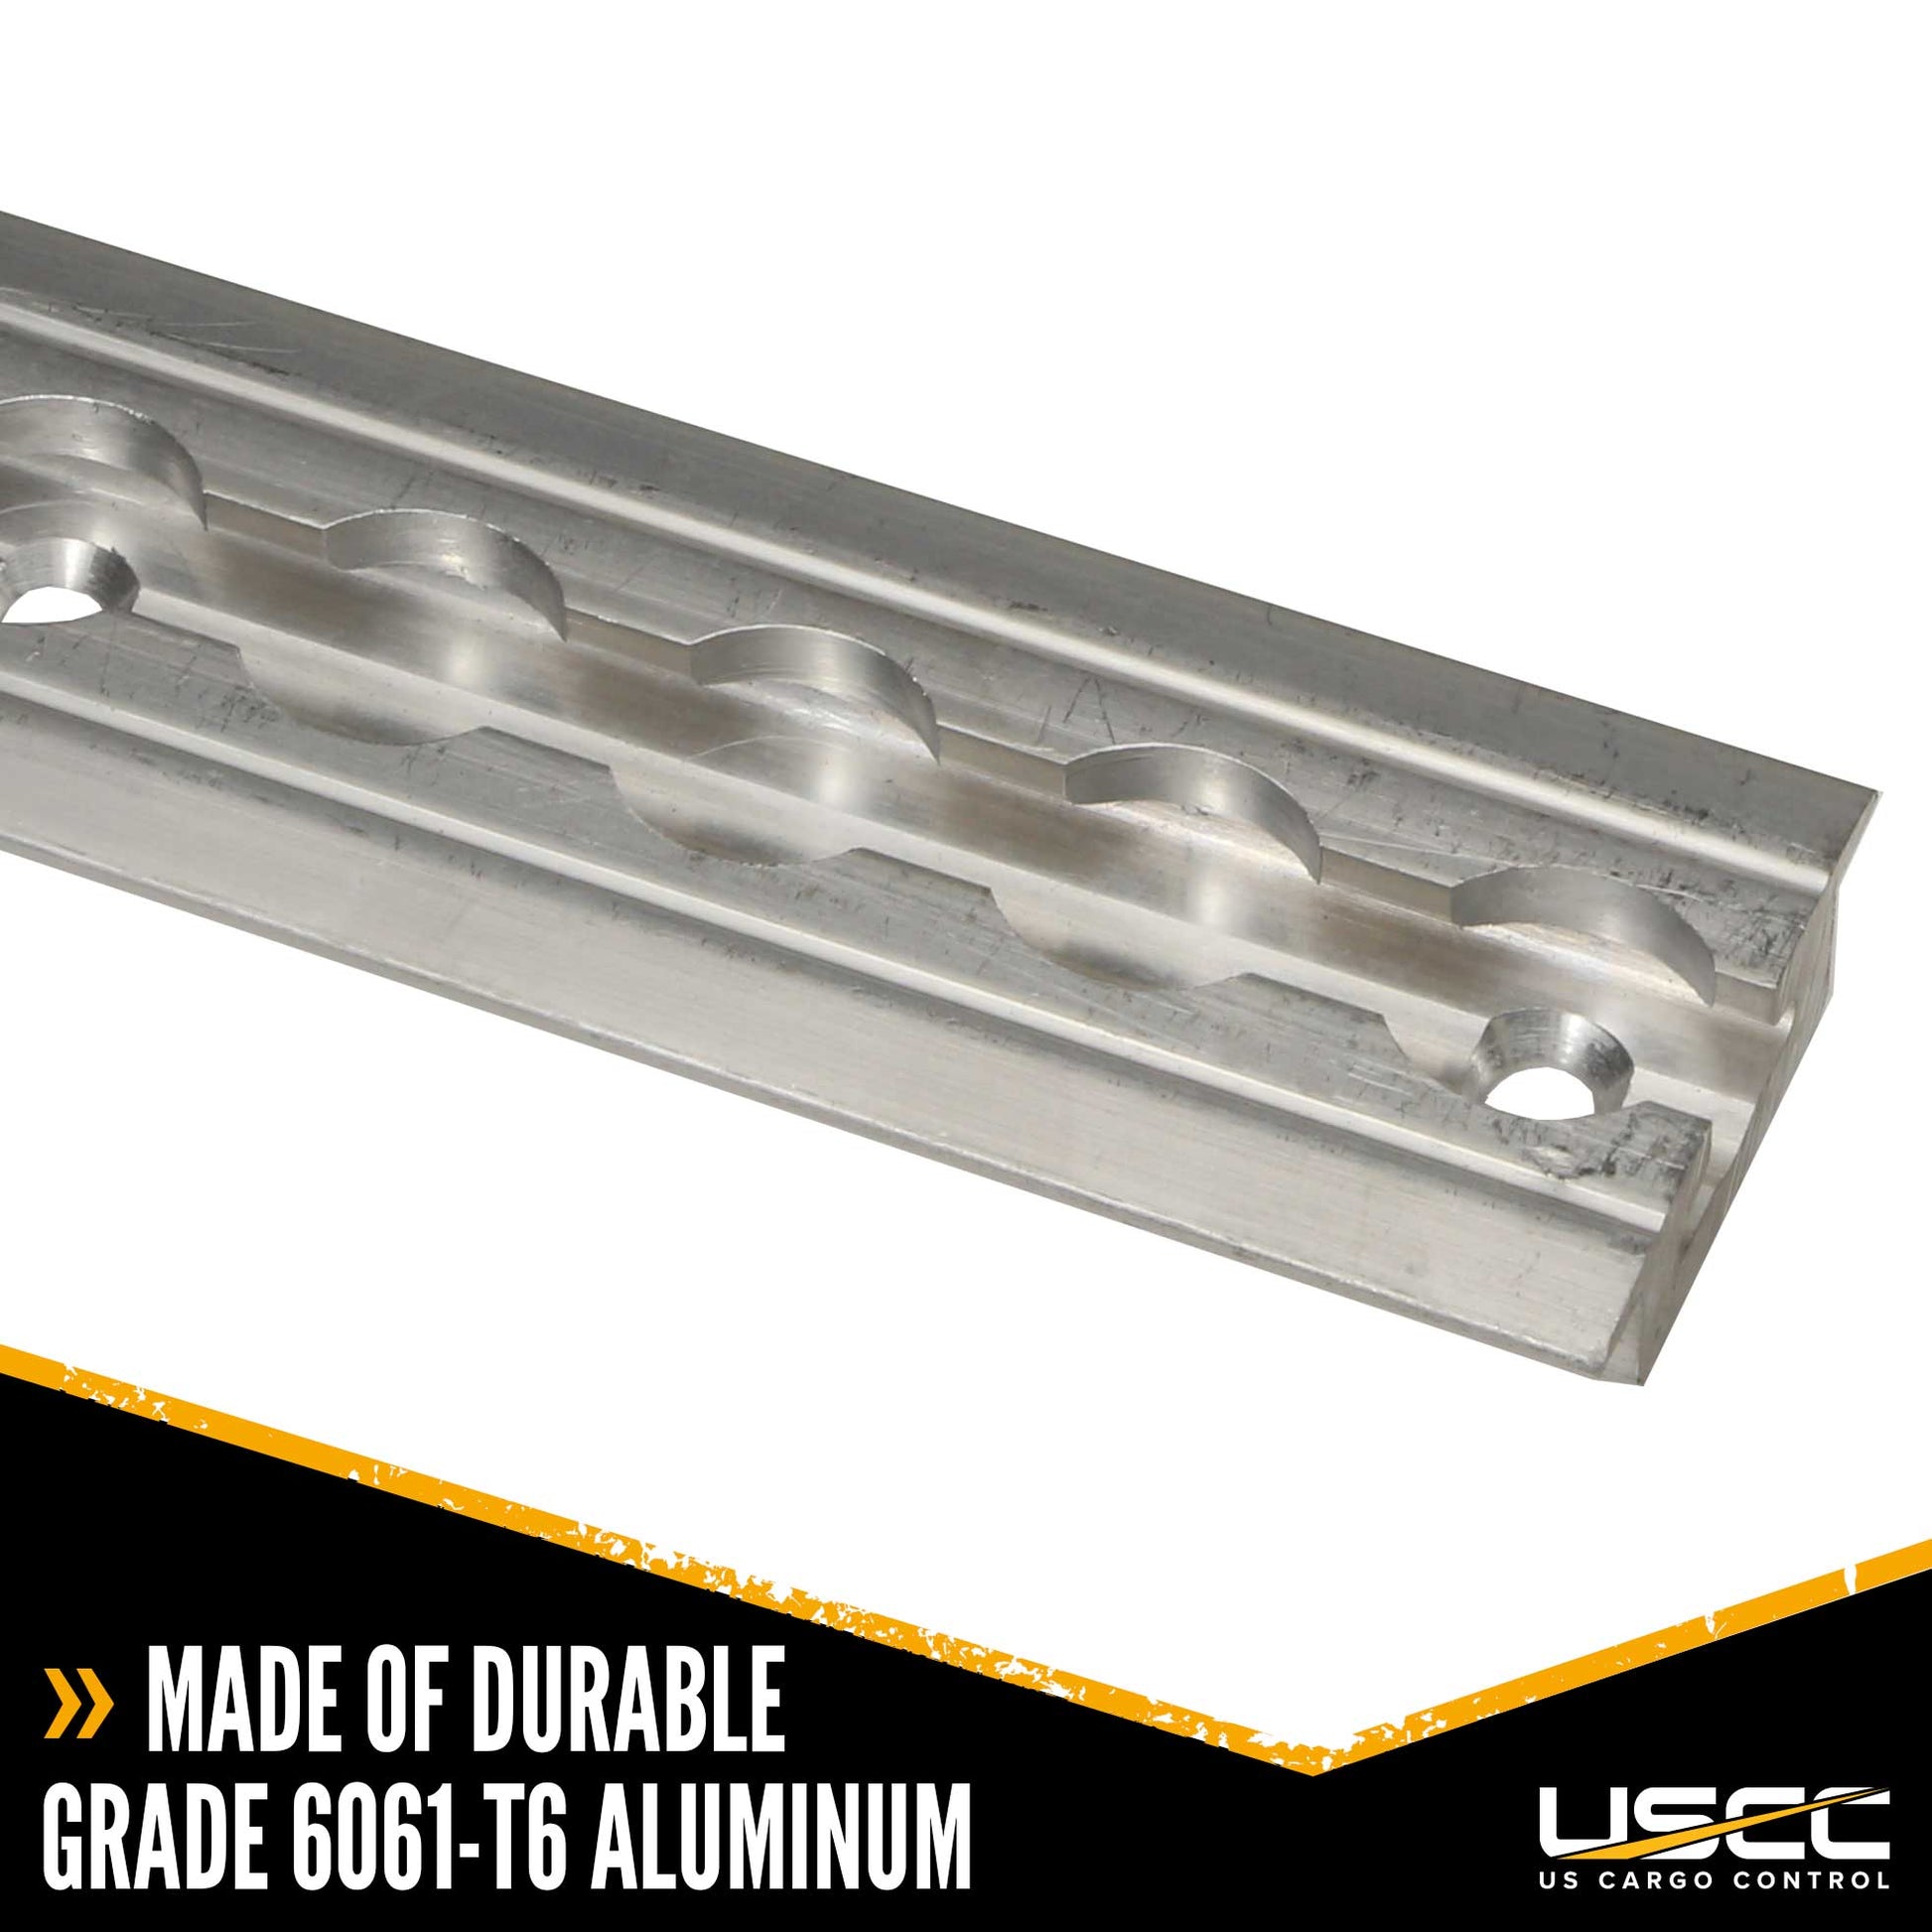 96 inch Flanged AirlineStyle Track Aluminum image 2 of 7